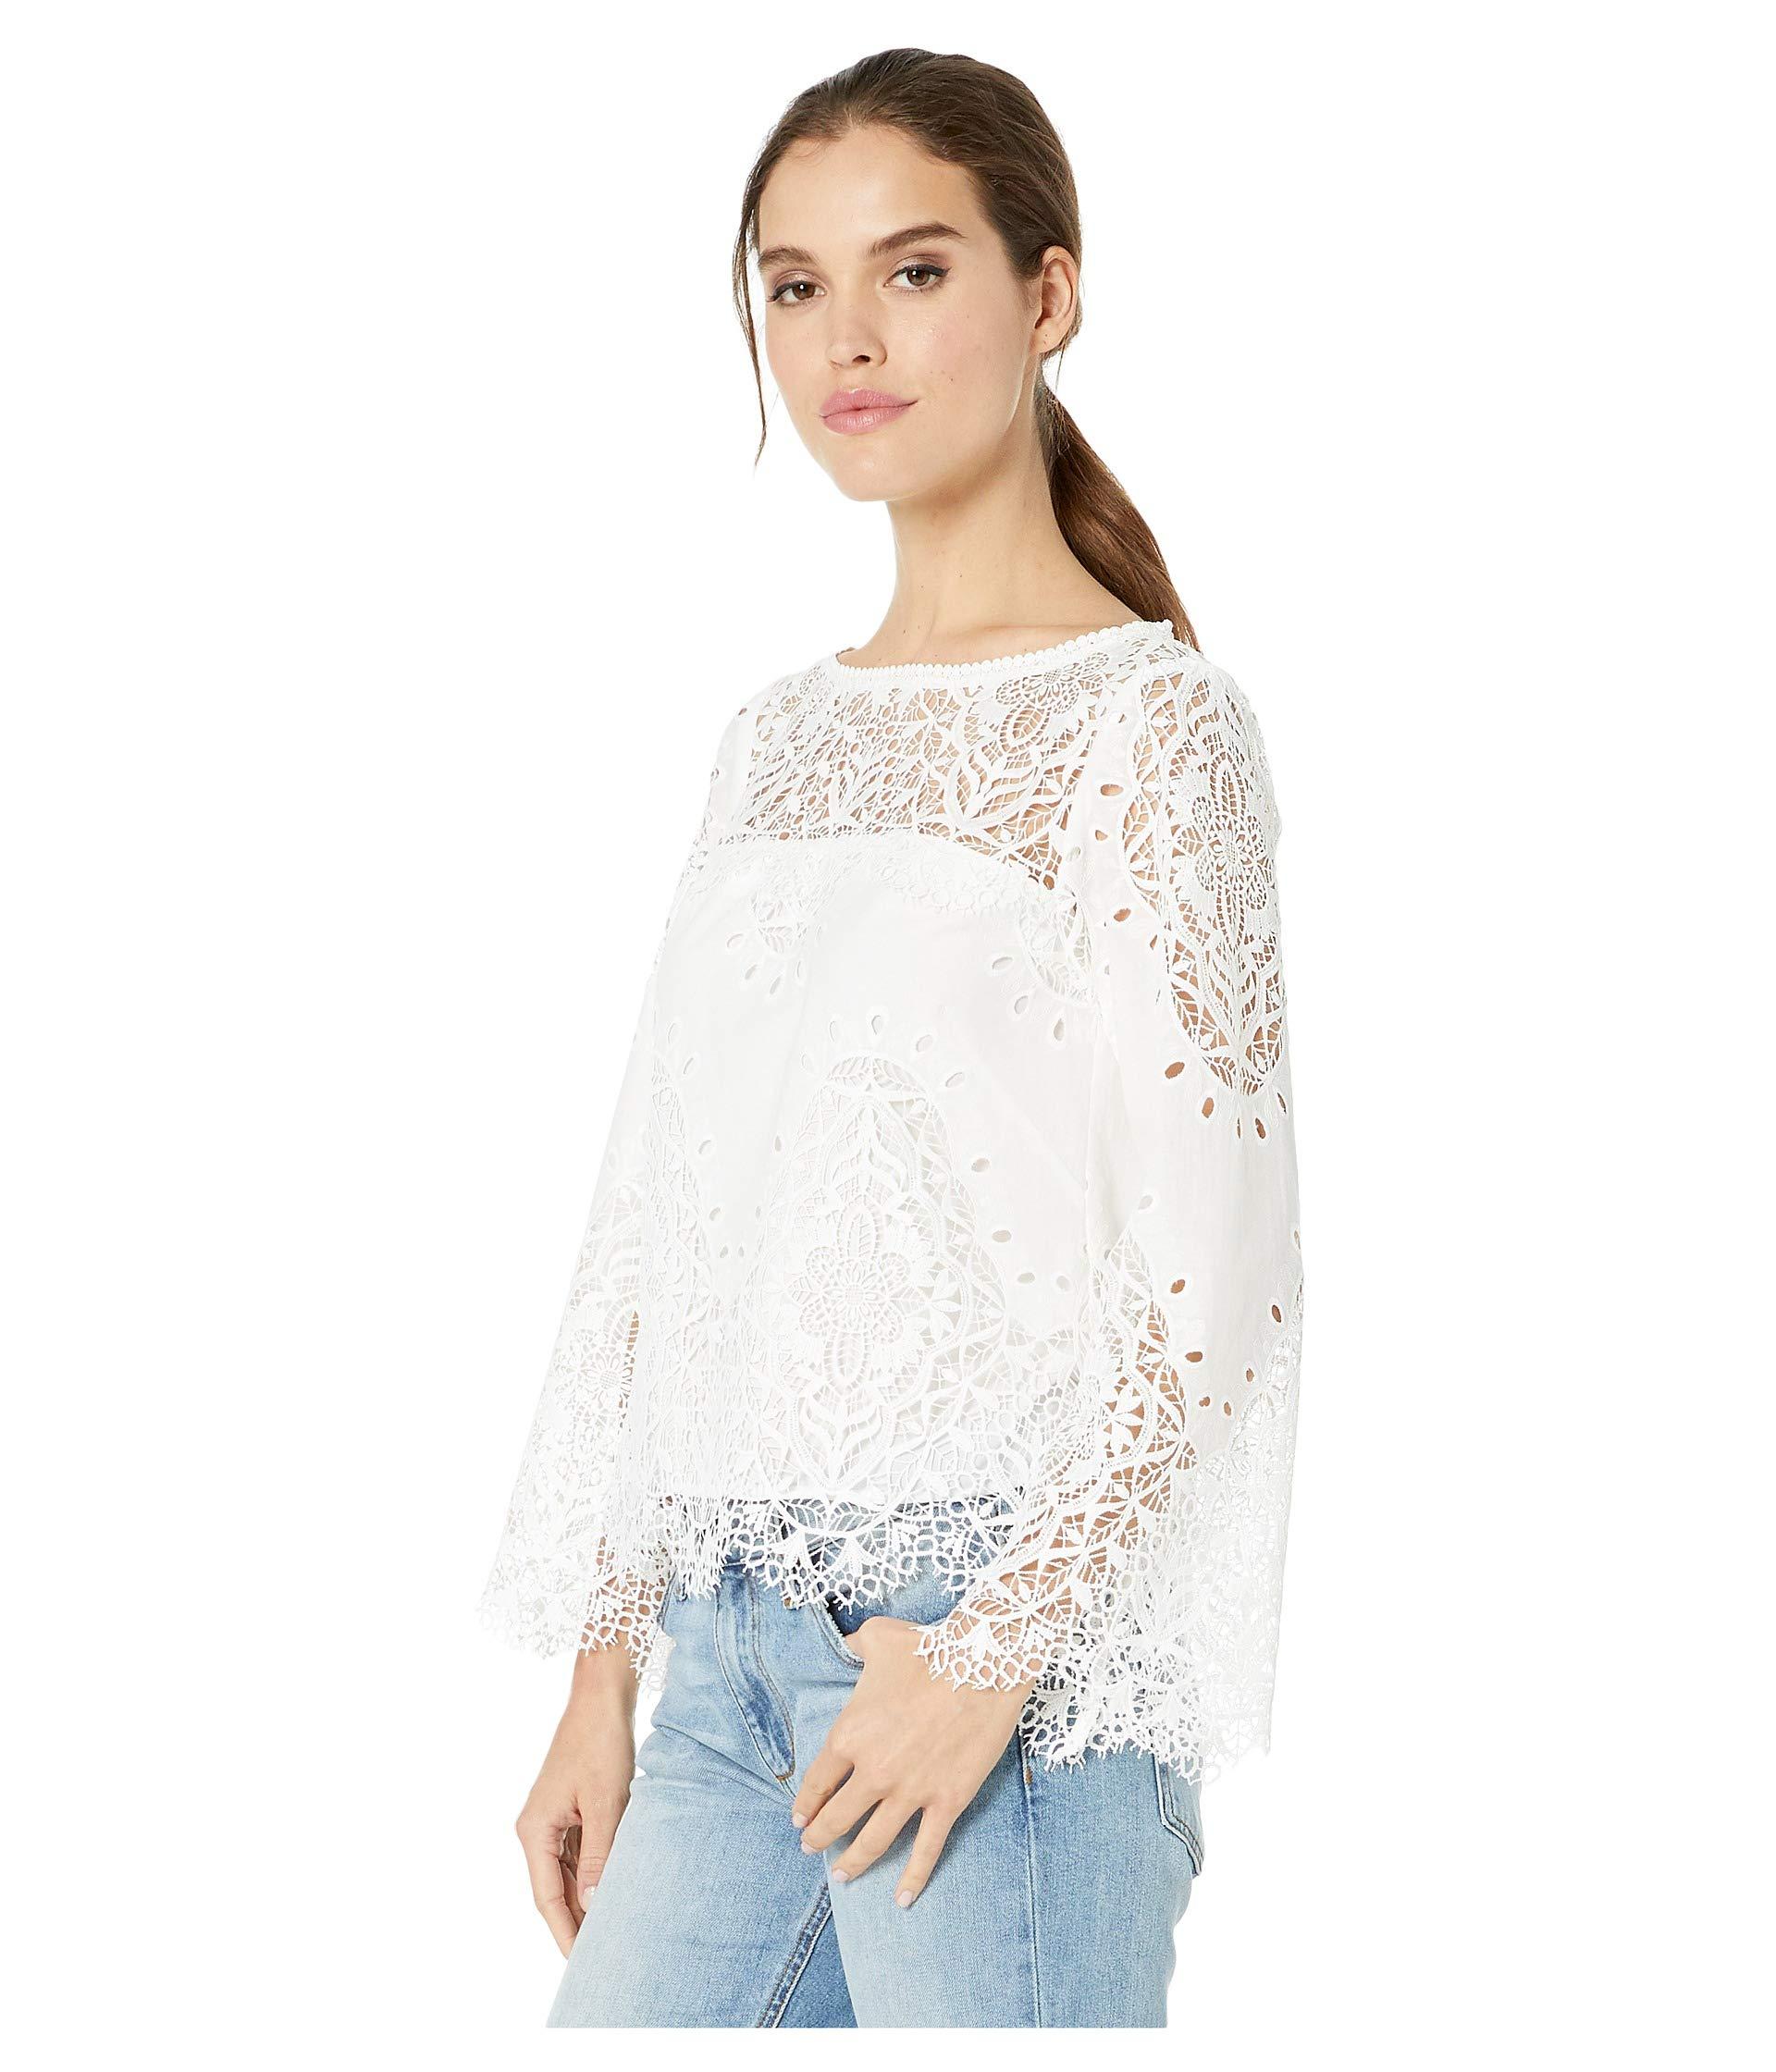 Nanette Lepore Cotton Lacey Top in White - Lyst